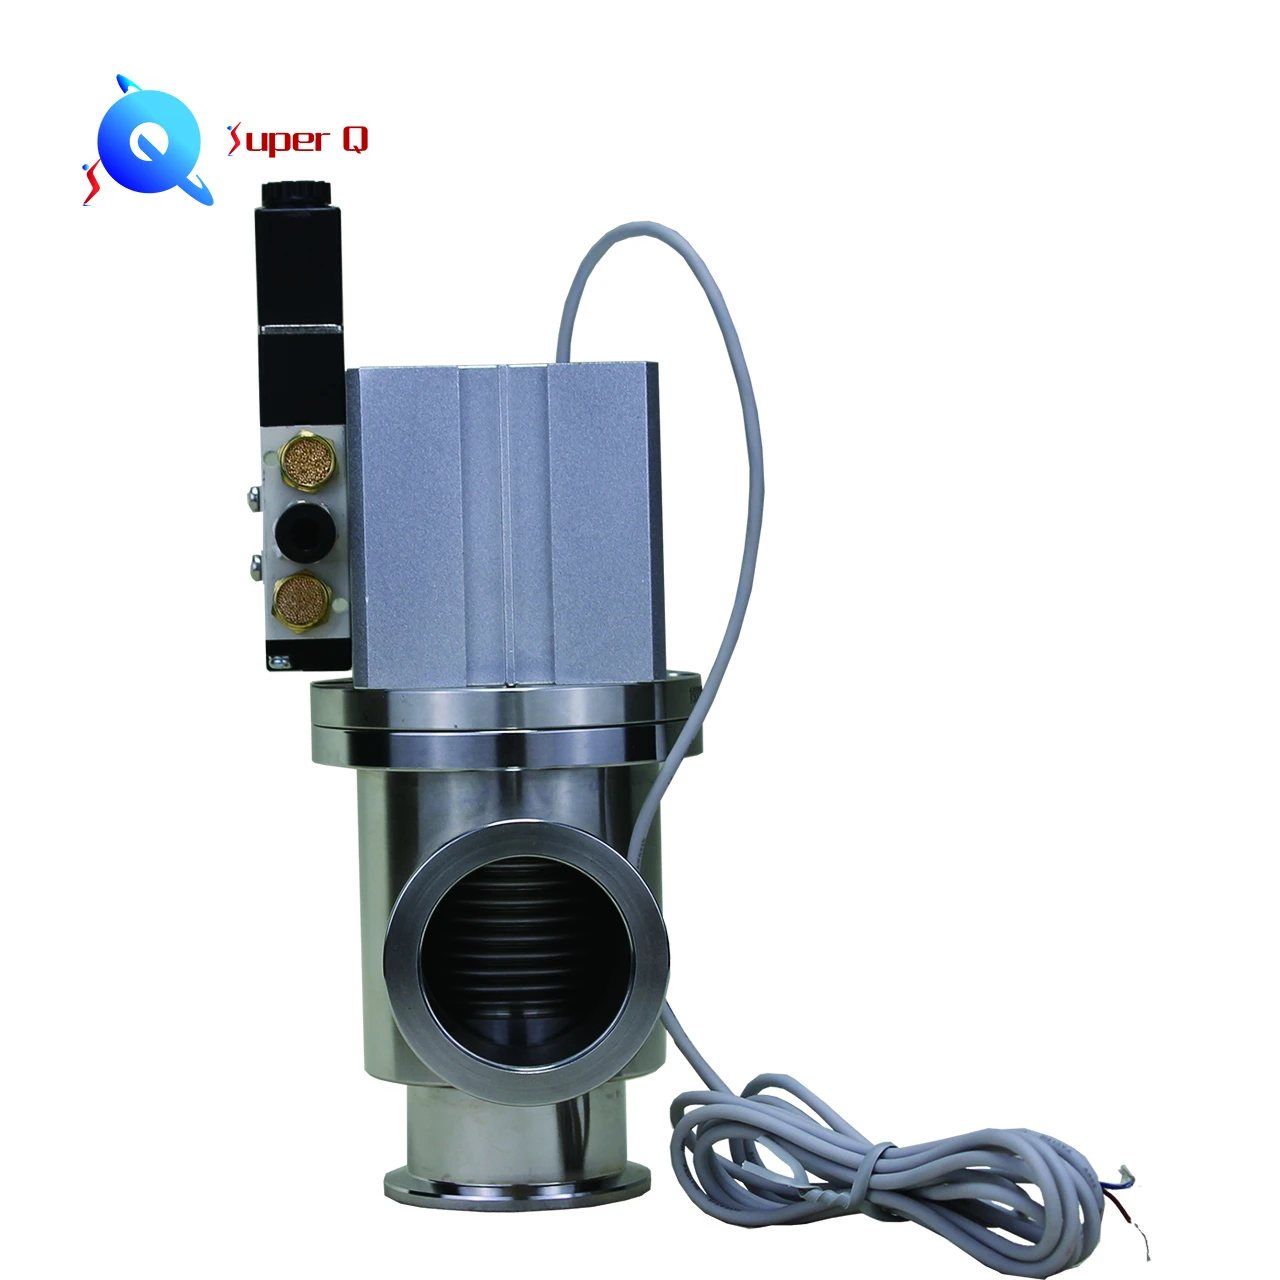 KF25 Flange Pneumatic angle valves with O-ring Bonnet Seal